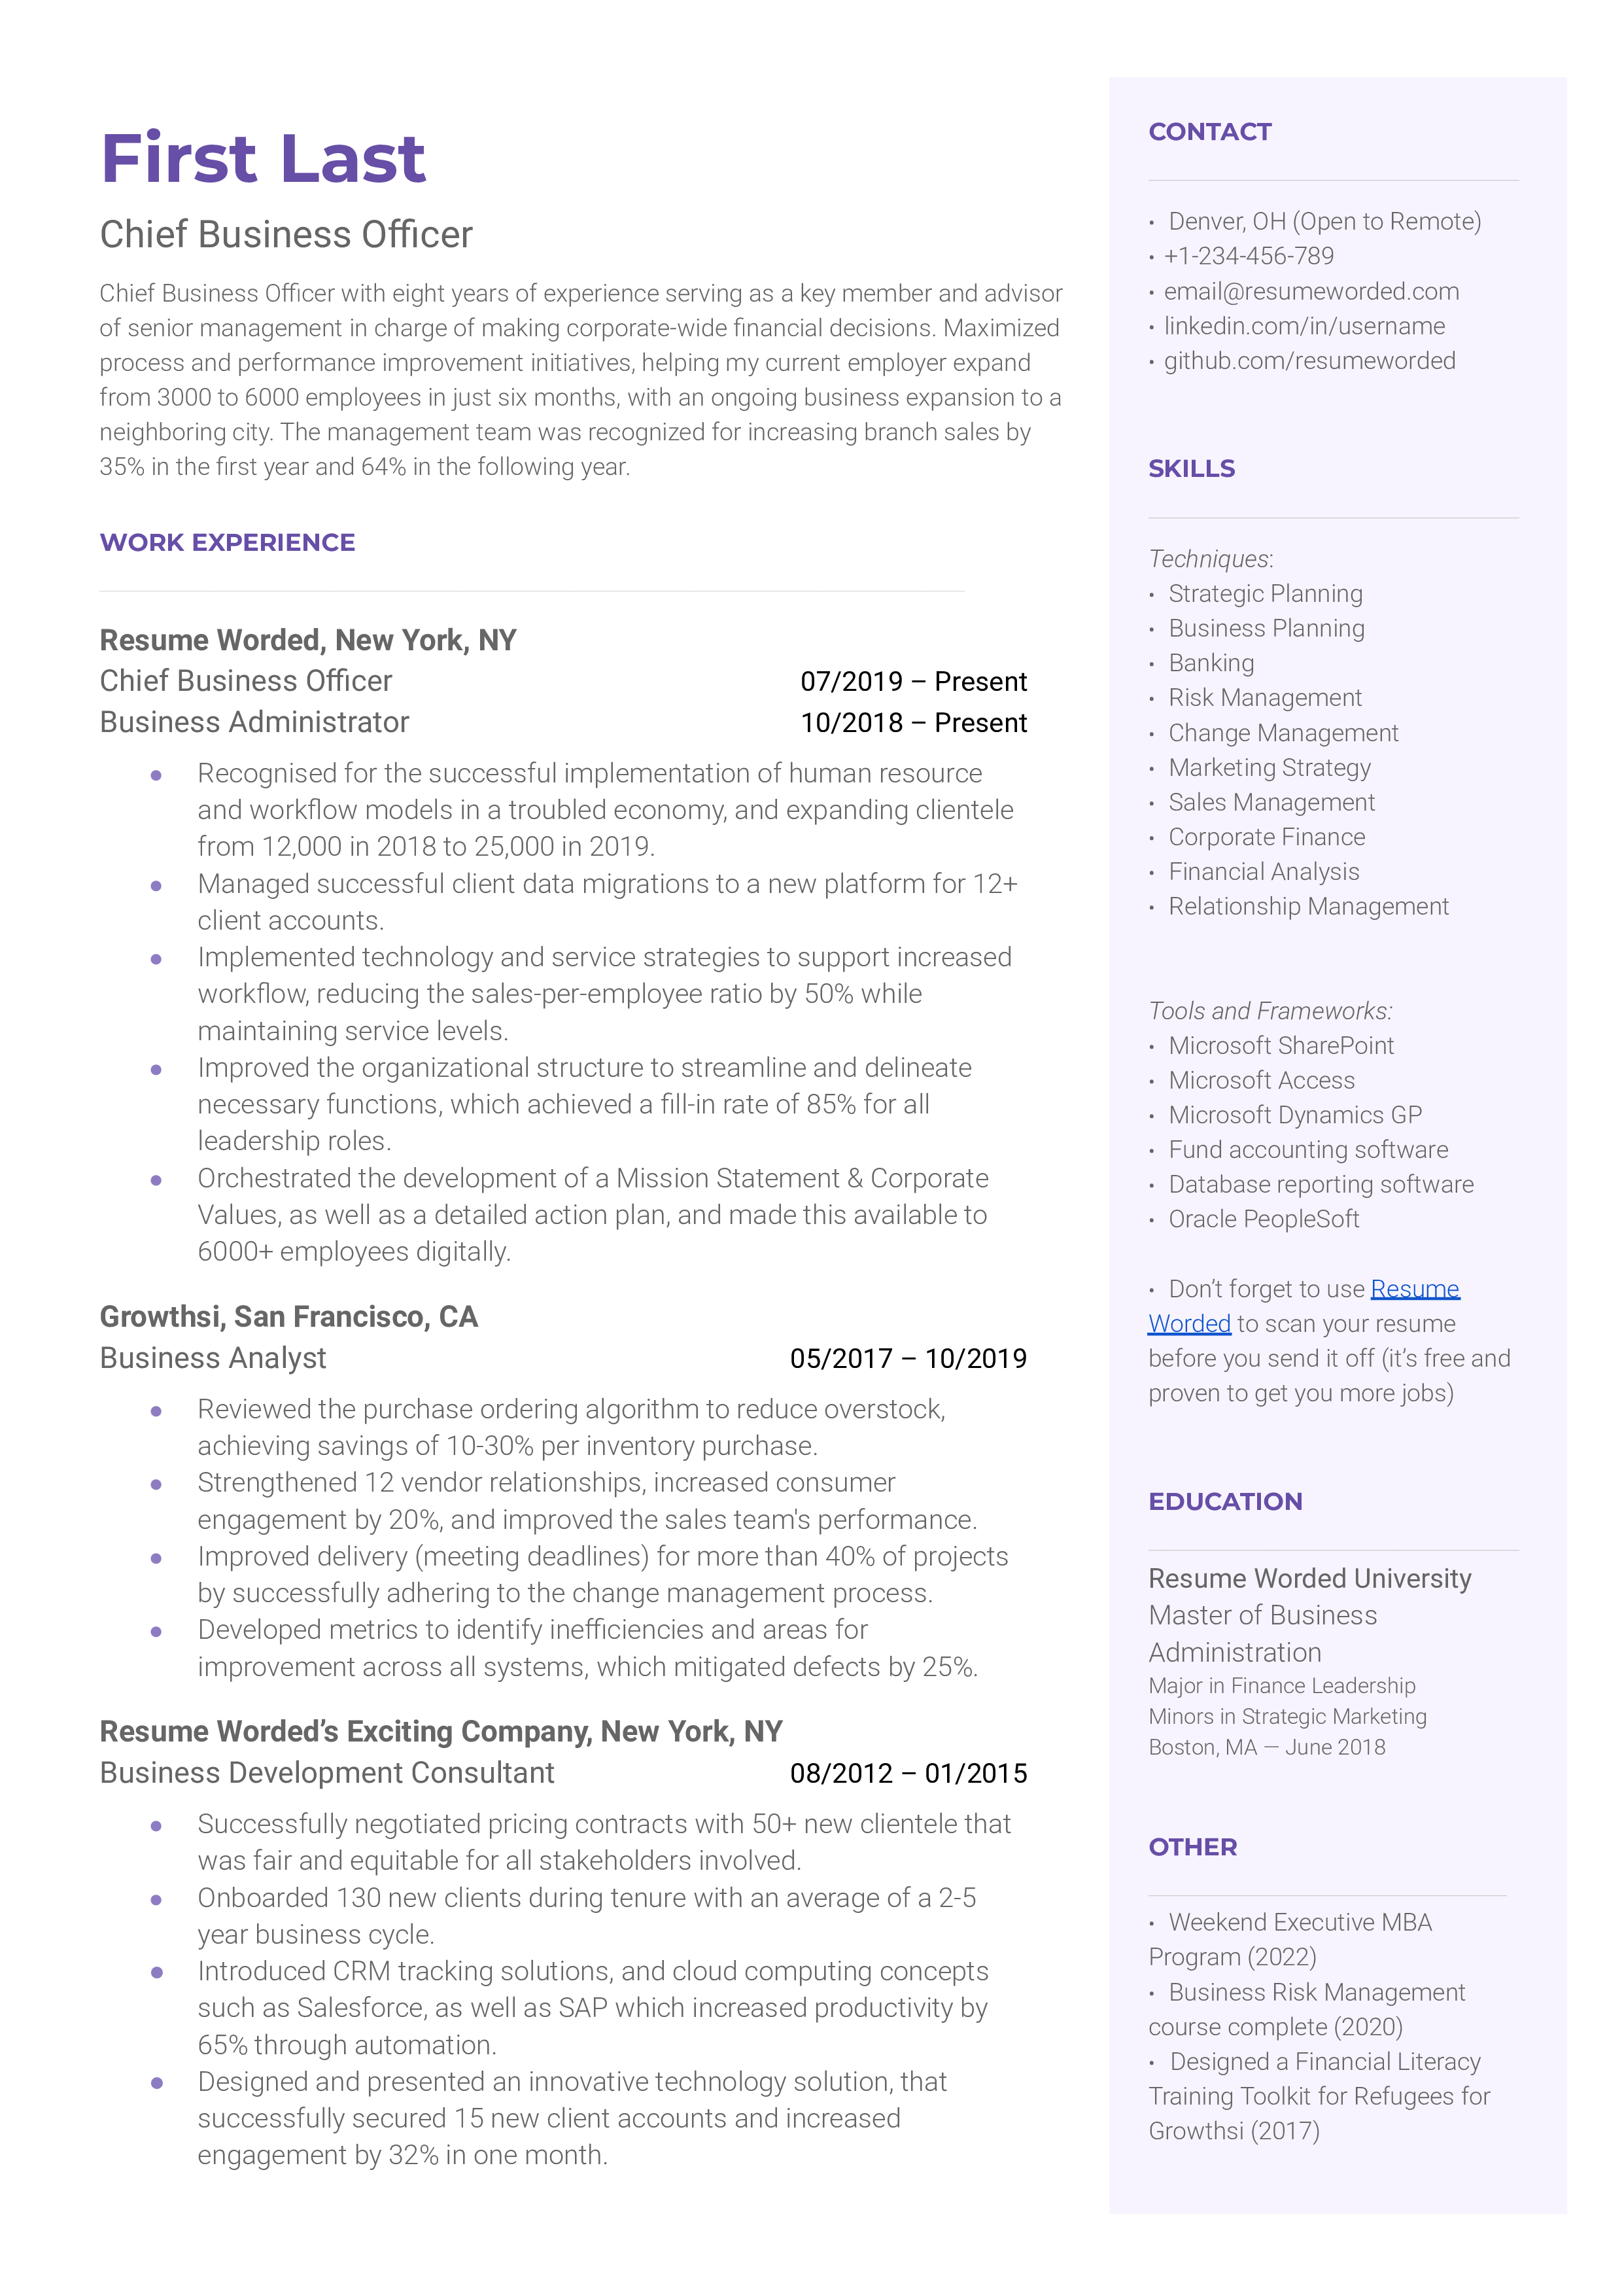 Chief Business Officer Resume Sample